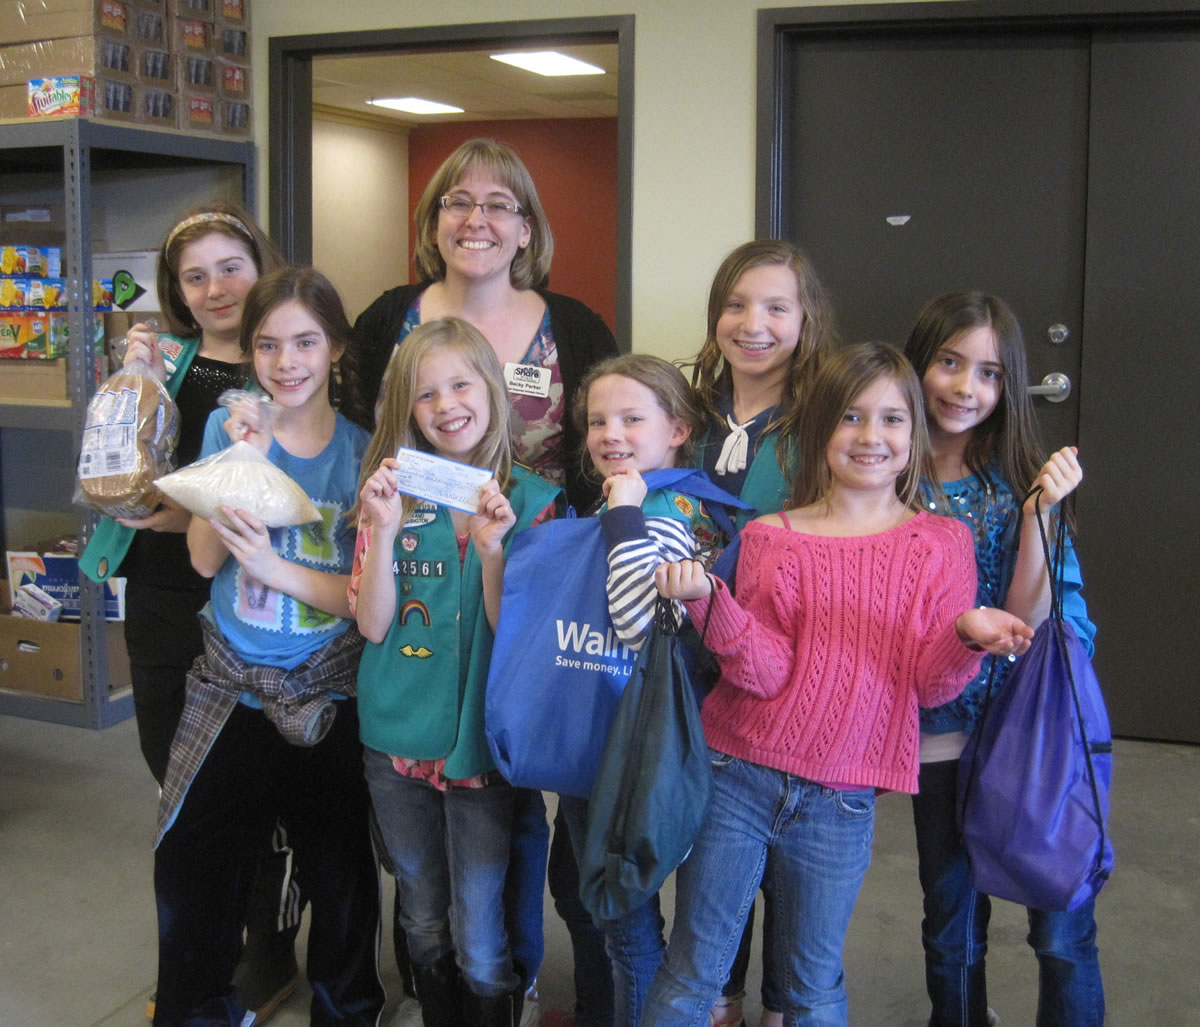 Meadow Homes: Members of Vancouver Girl Scout Troop 42561 donate $506 on April 10 to the Share Backpack Program, which helps provide food to children in need. From left back: Maddy Surface, Becky Parker of Share, Lily Jonas, Kenna Yakimchick.